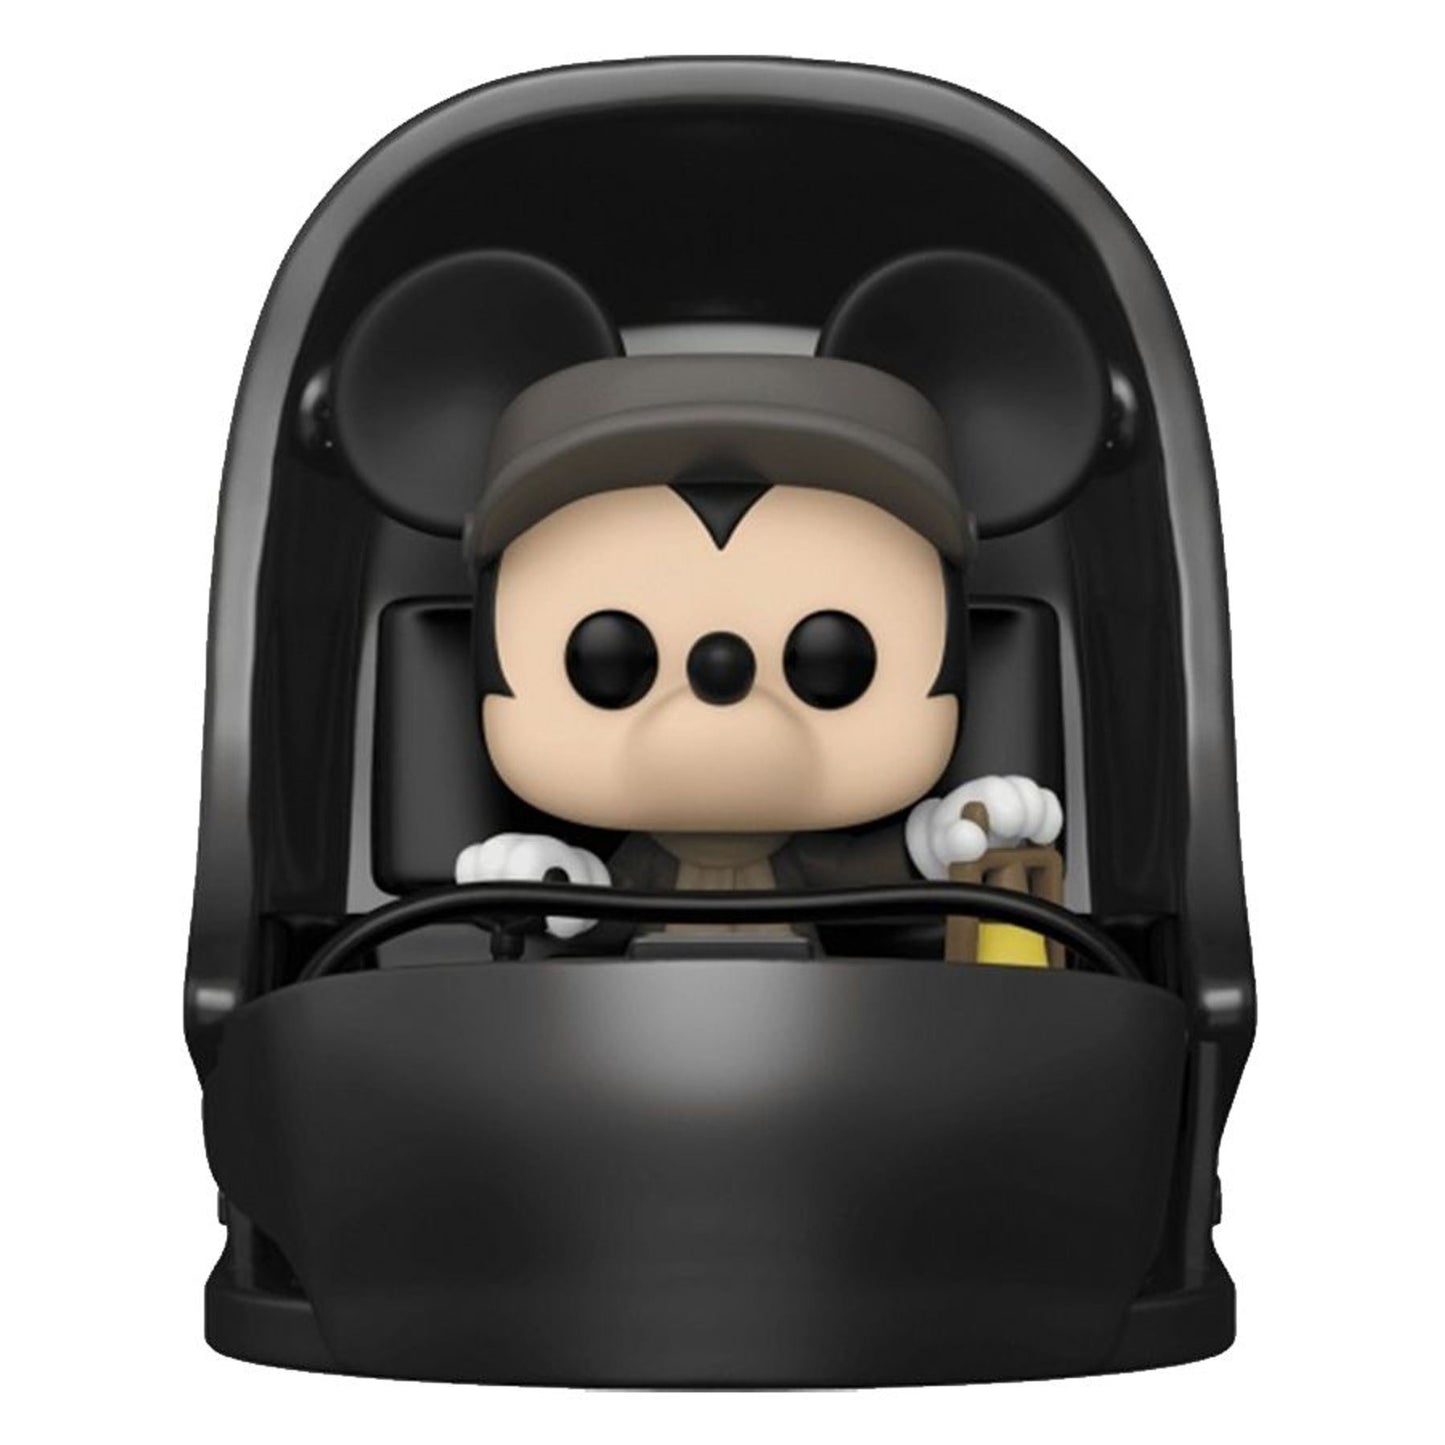 Funko POP! #294 Mickey Mouse Haunted Mansion Buggy WDW 50th Disney Exclusive